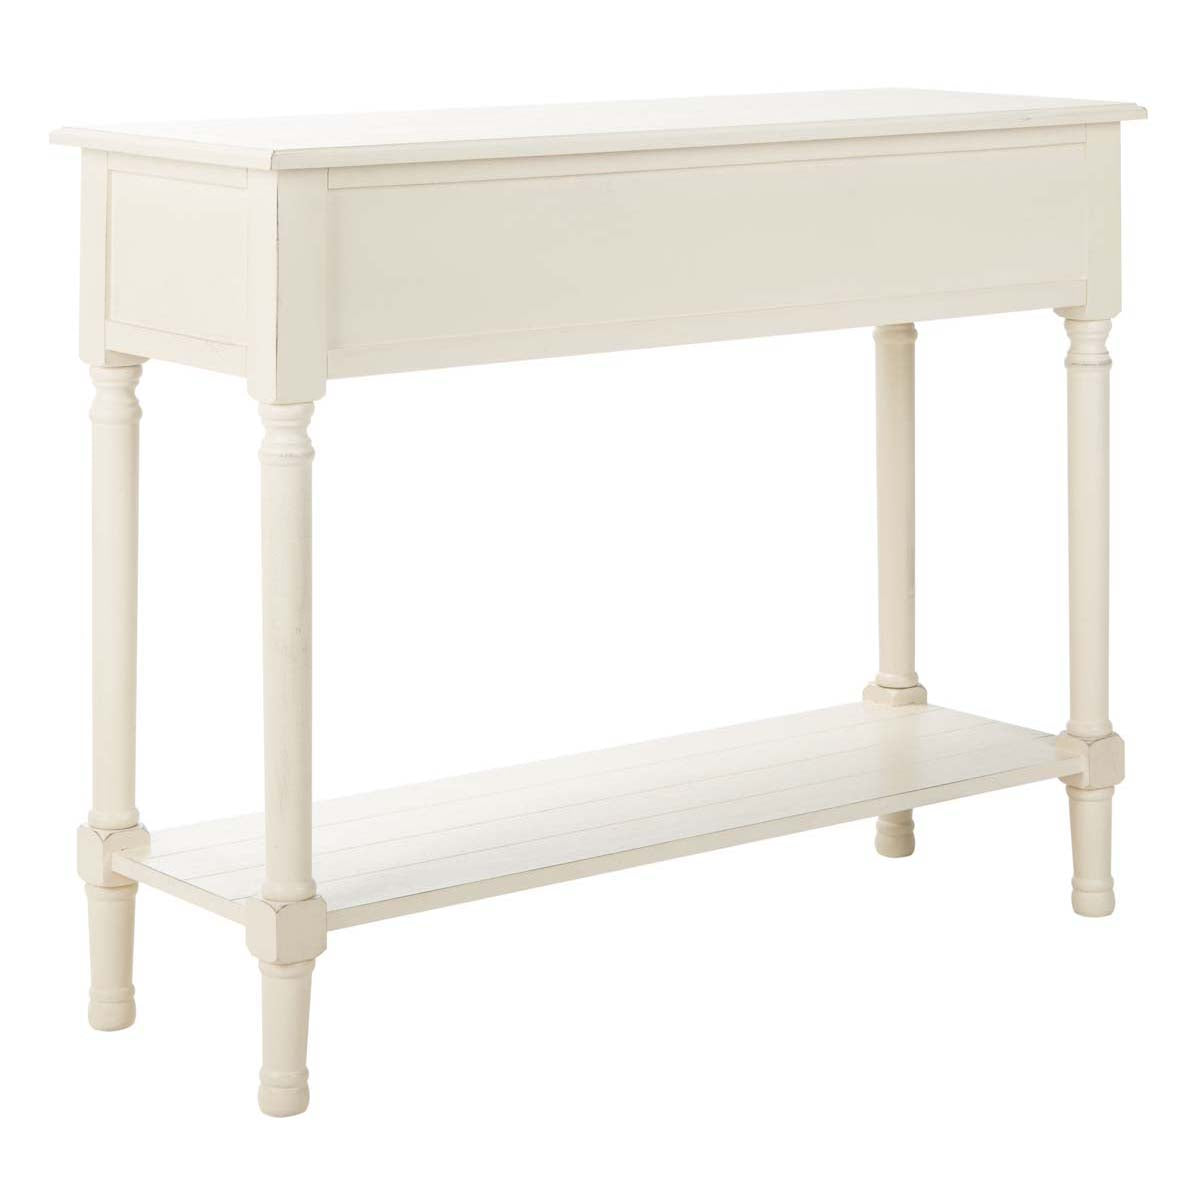 Safavieh Primrose 2 Drawer Console Table , CNS5706 - Distrssed White